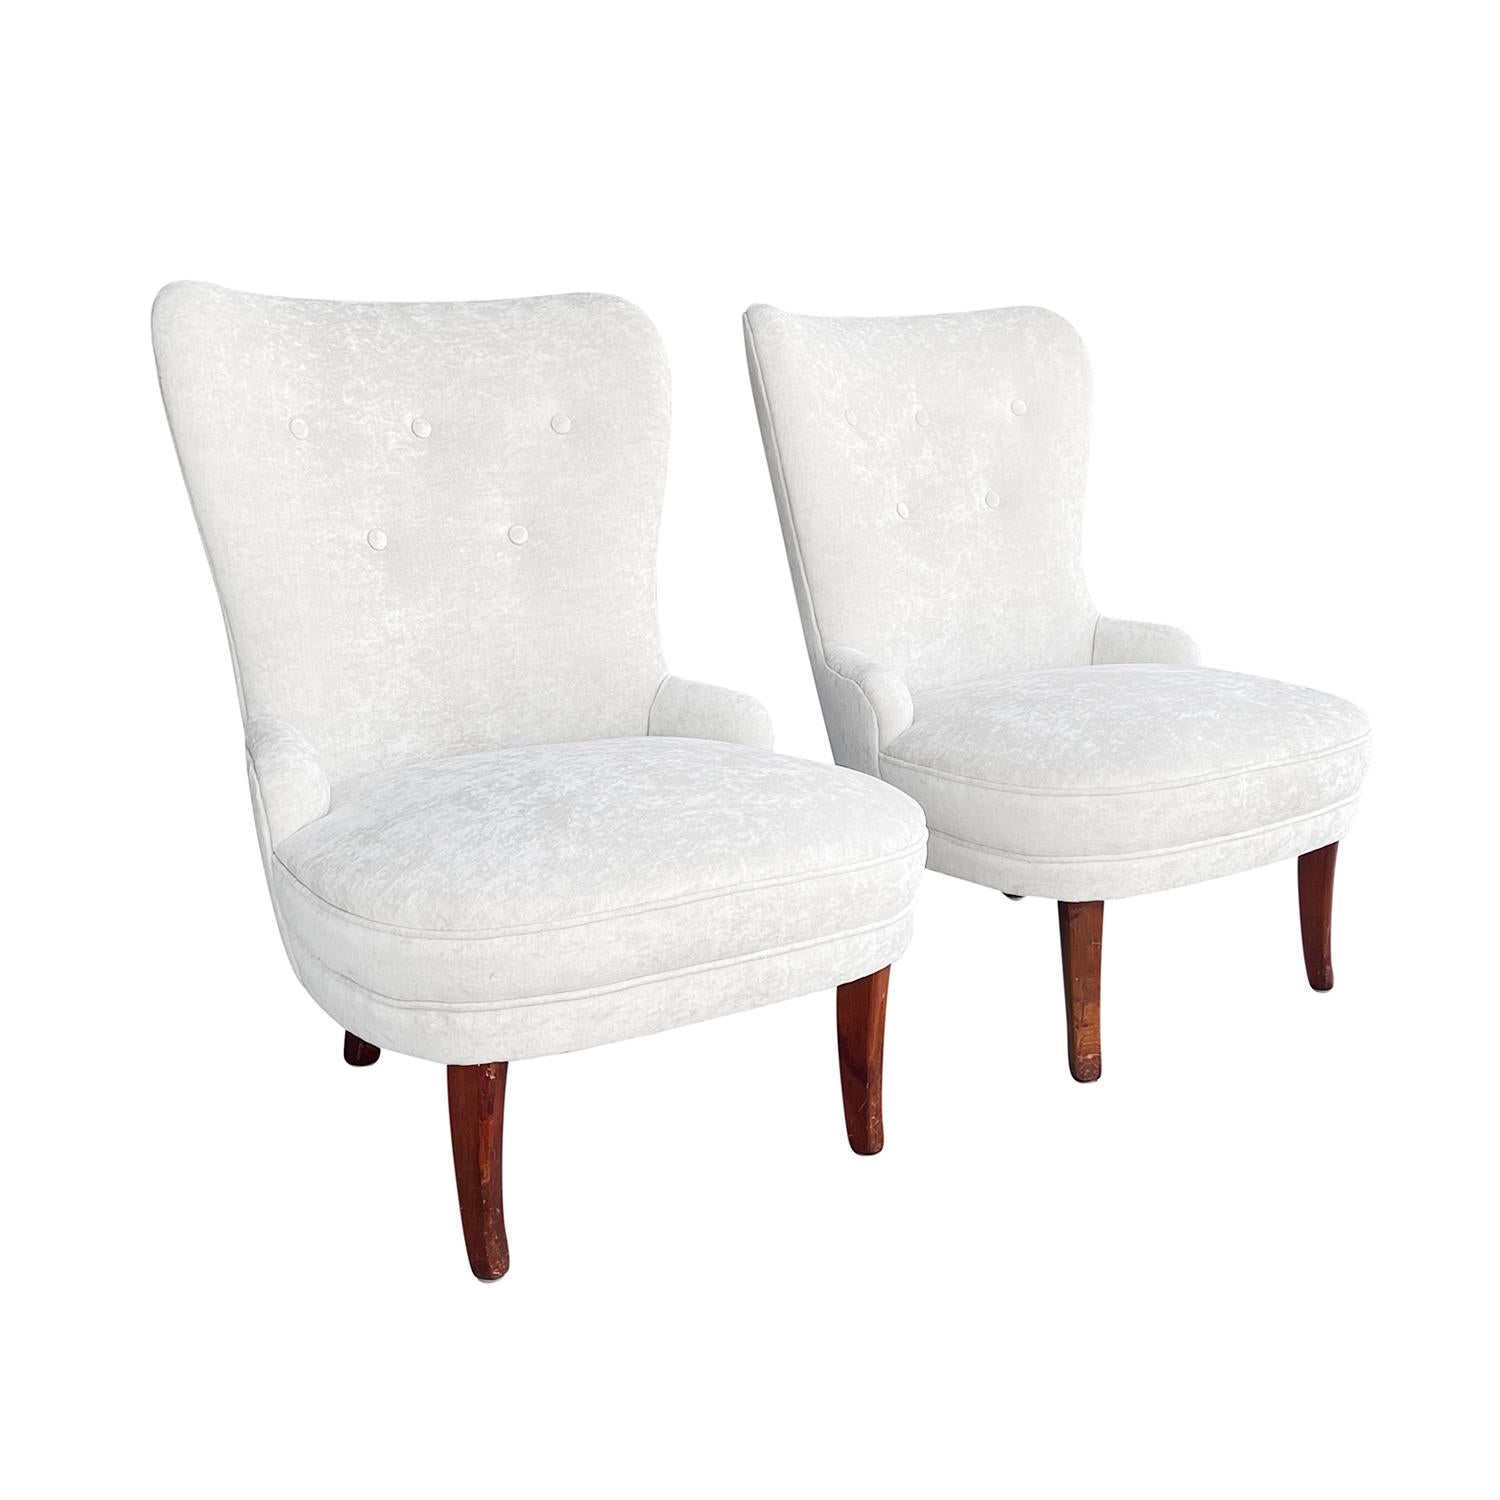 A small, vintage Mid-Century Modern Swedish pair of styled slipper chairs designed by Carl Malmsten, in good condition. The Scandinavian side chairs are standing on four slightly curved Mahogany feet. Newly upholstered in a white-grey fabric. Wear